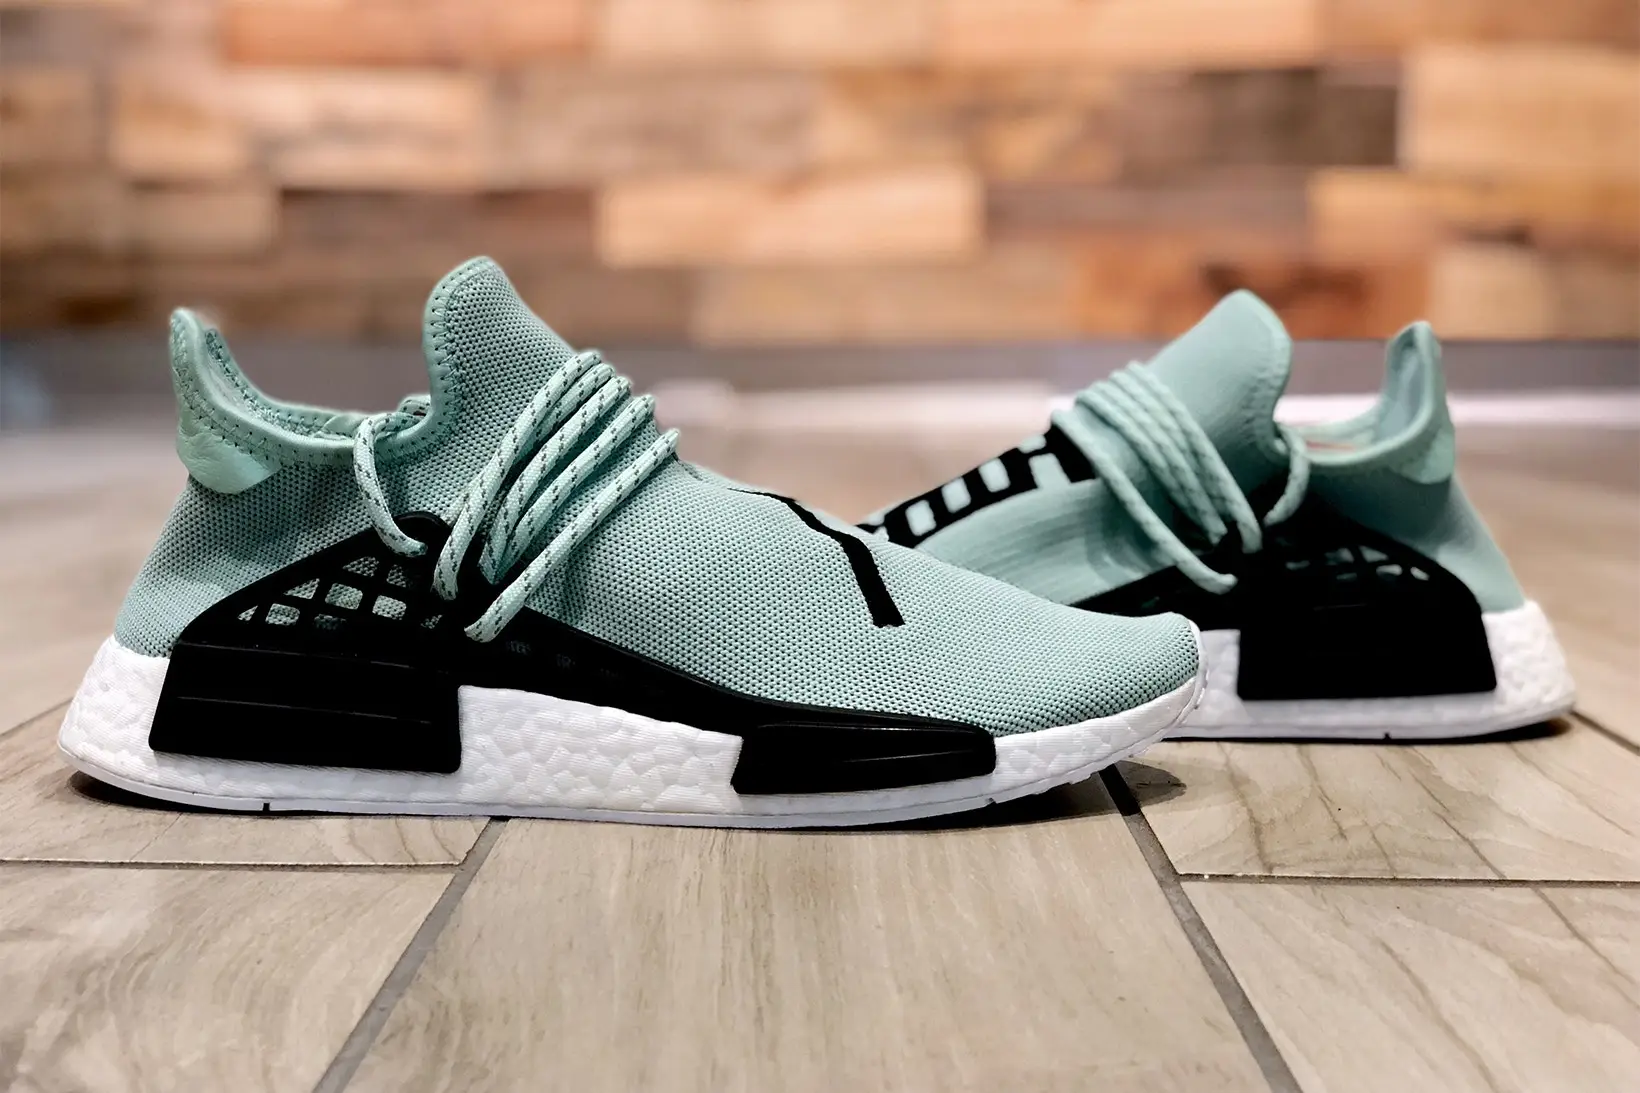 These Rare Pharrell Williams x adidas Originals NMD Human Races Can Be ...